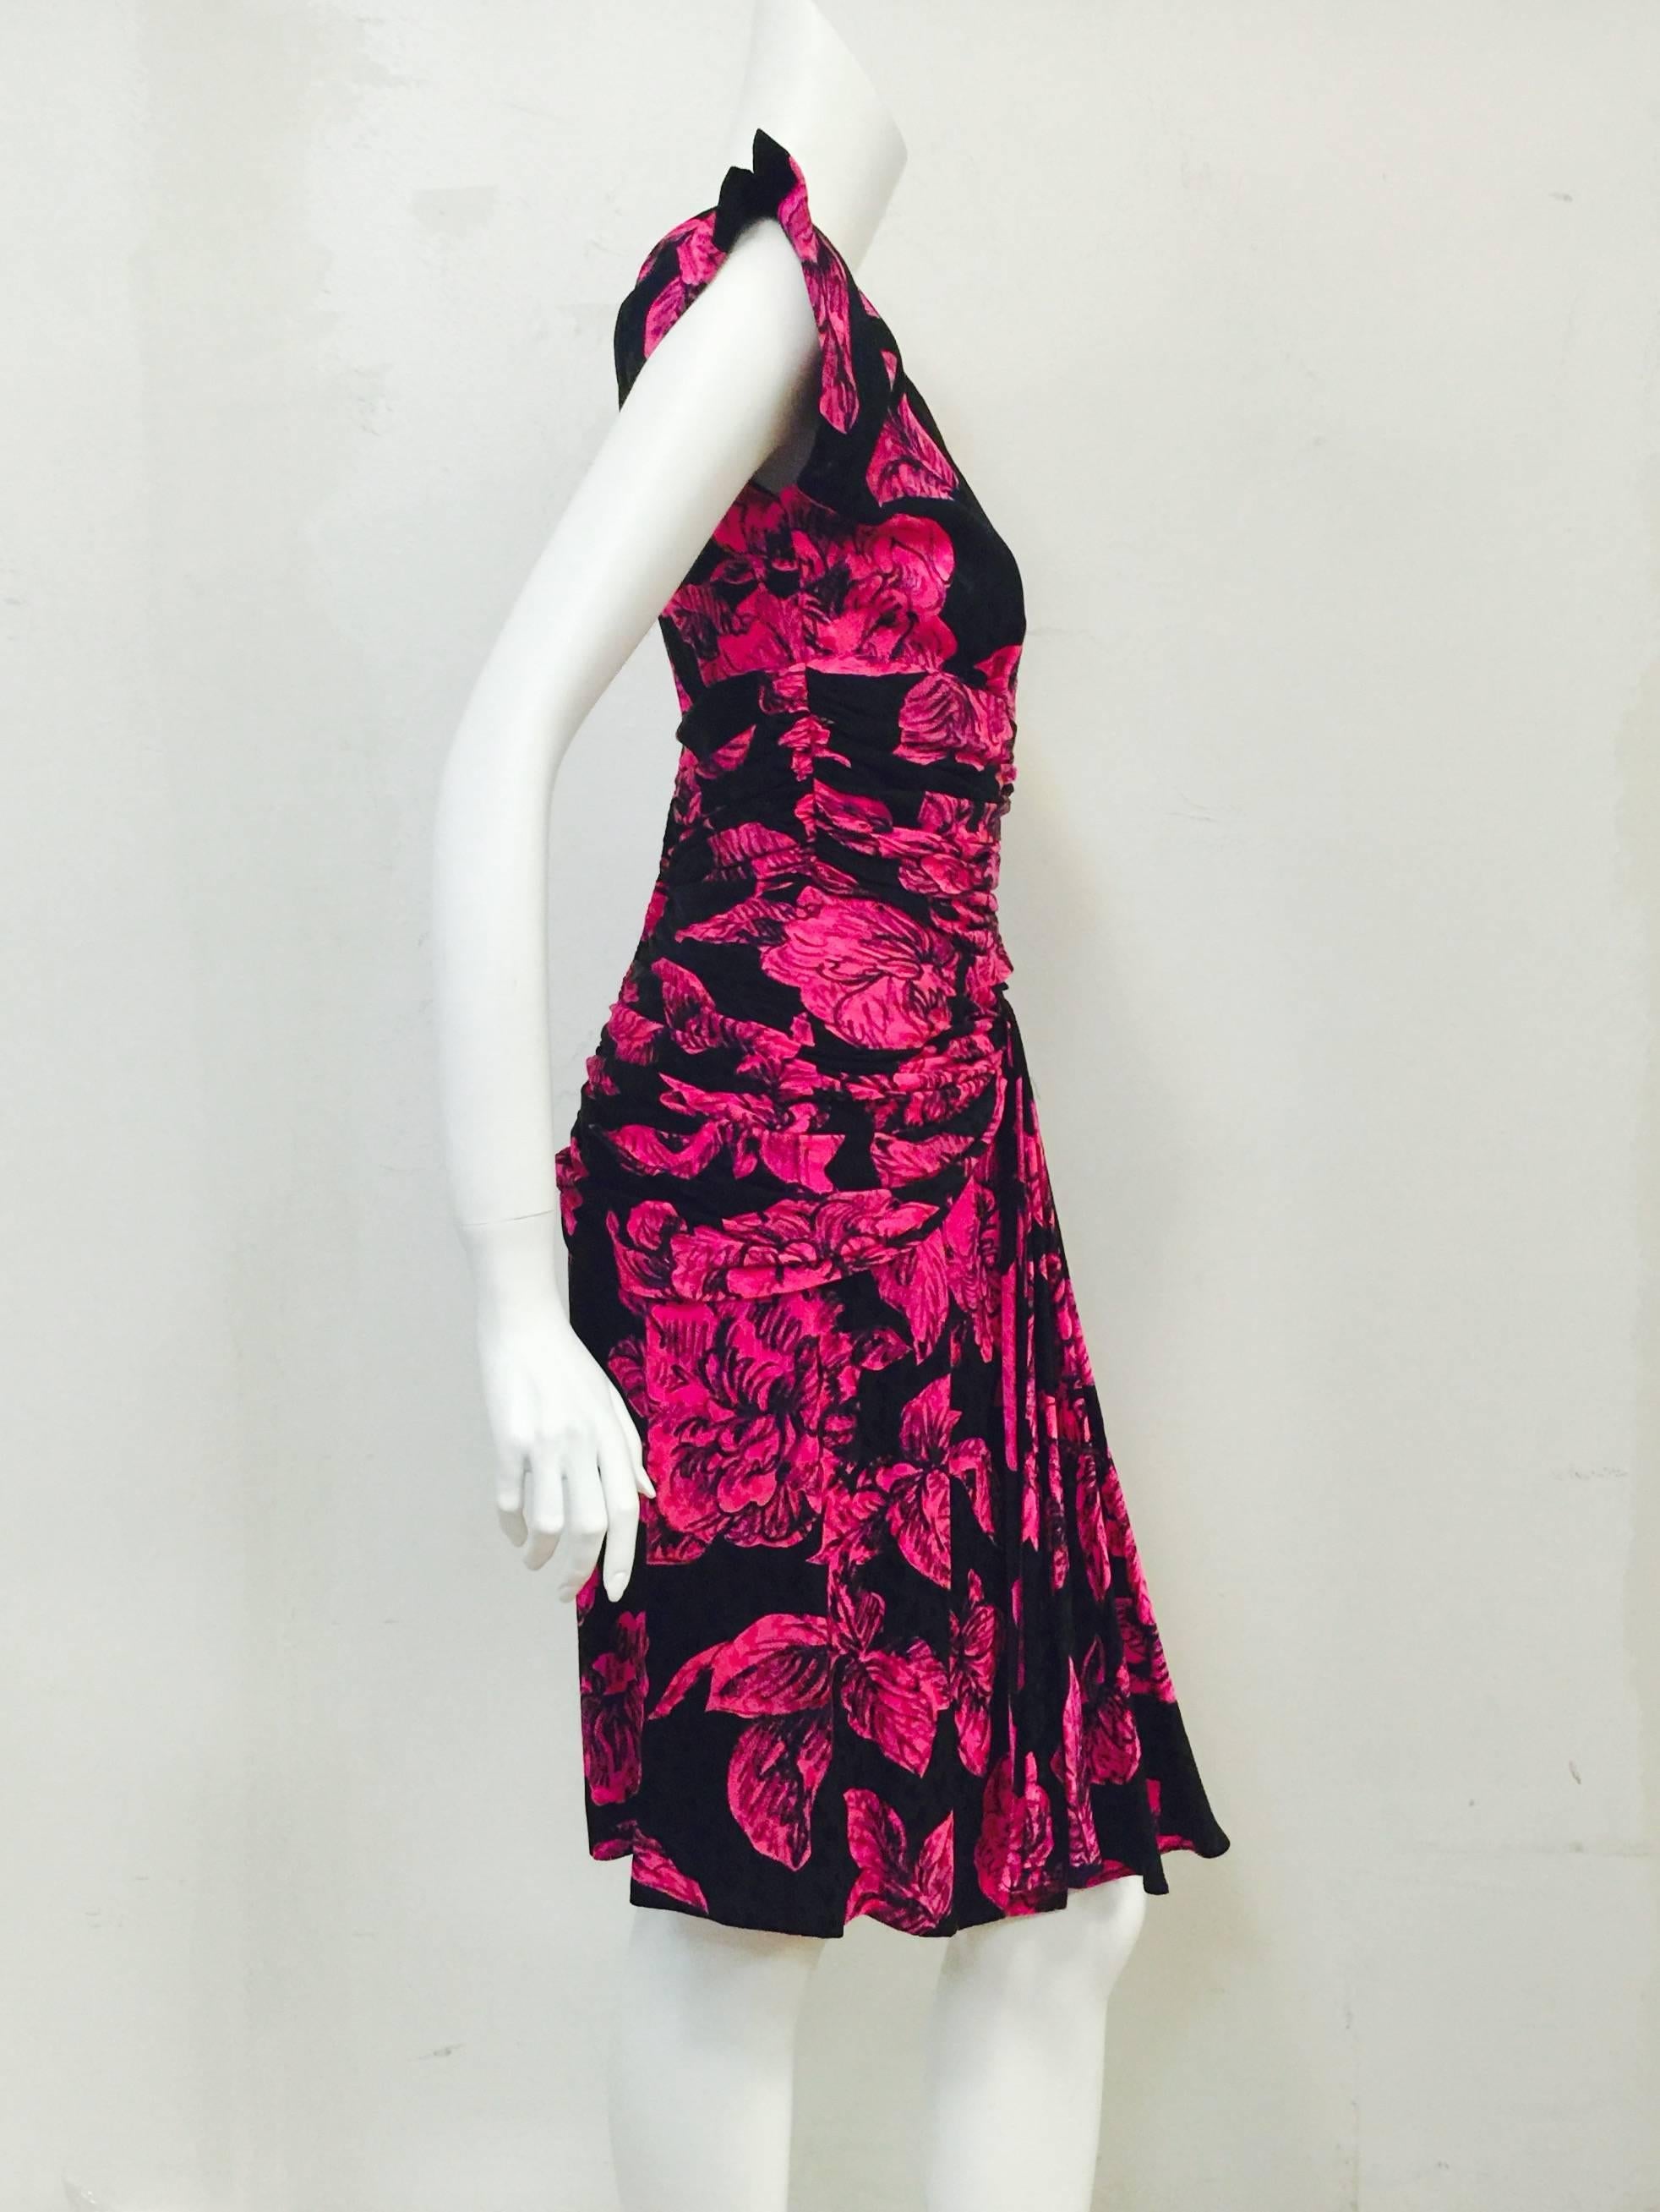 Vicky Tiel Fuschia and Black Floral Silk Jacquard Dress is made it France...it shows!  Imported by Neiman Marcus, dress is feminine, flirty and definitely French!  Features ultra-luxurious silk, bold, vibrant floral pattern, and couture inspired